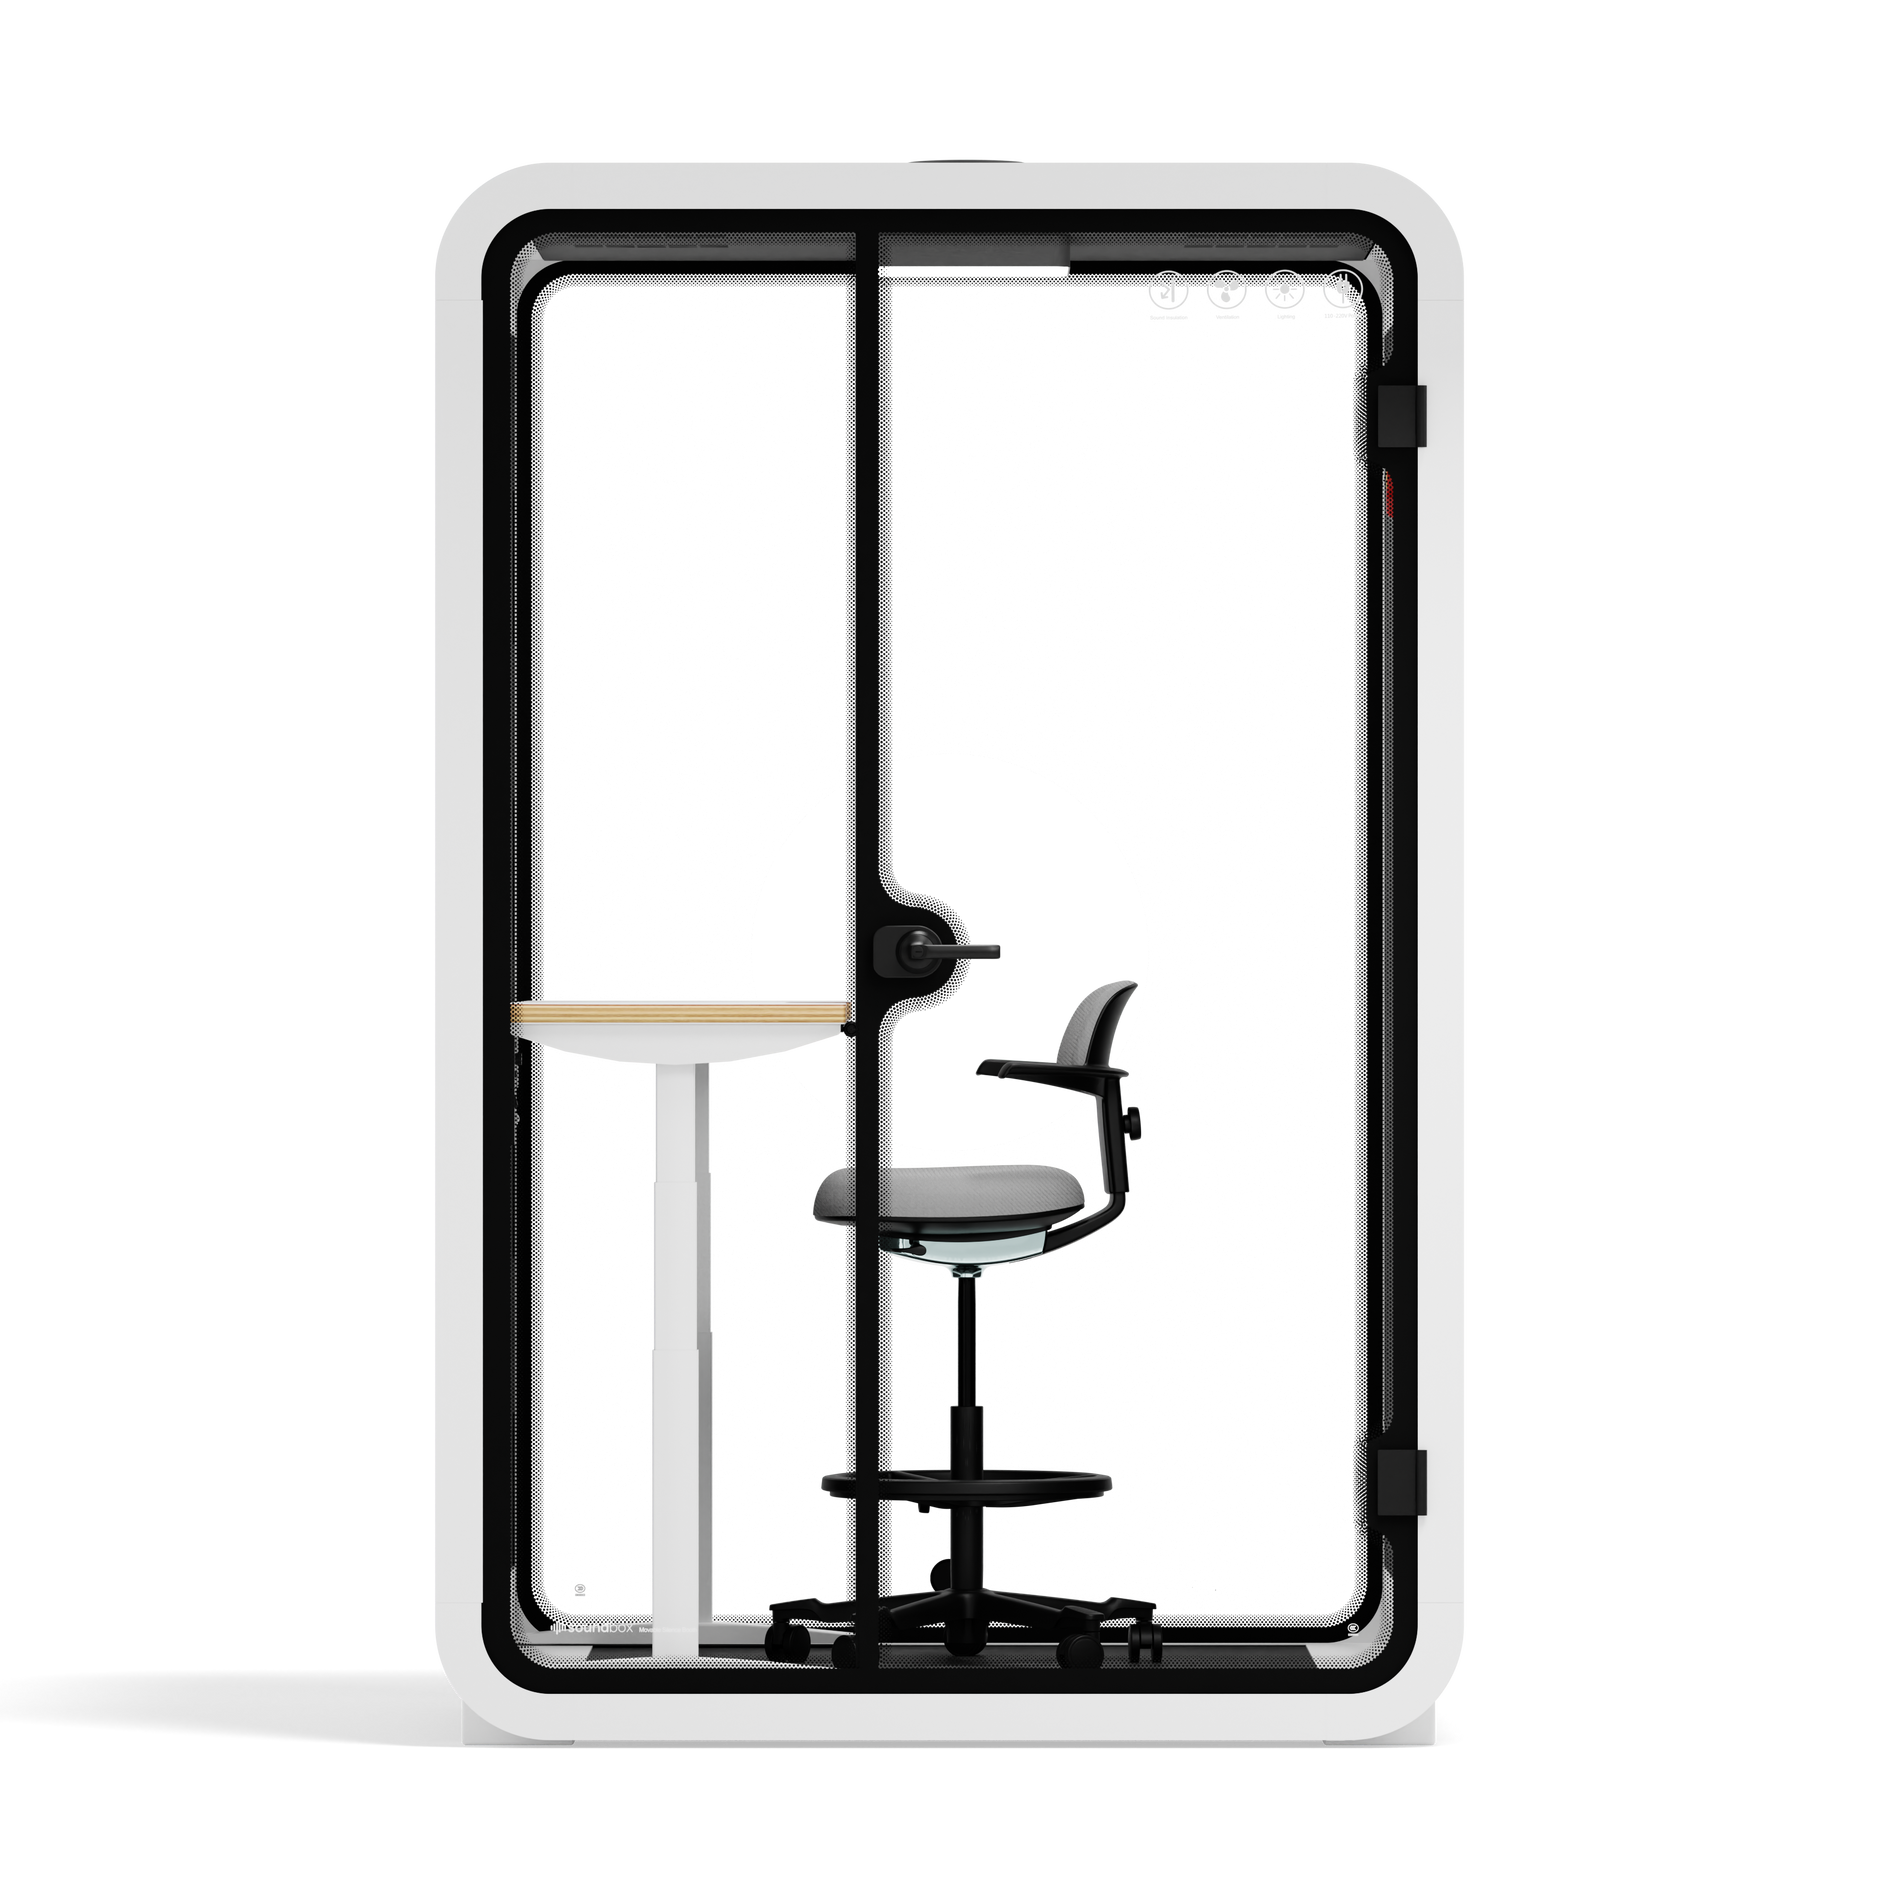 Quell - Office Pod - 2 PersonWhite / Dark Gray / Electric Adjustable Work Station + Stool